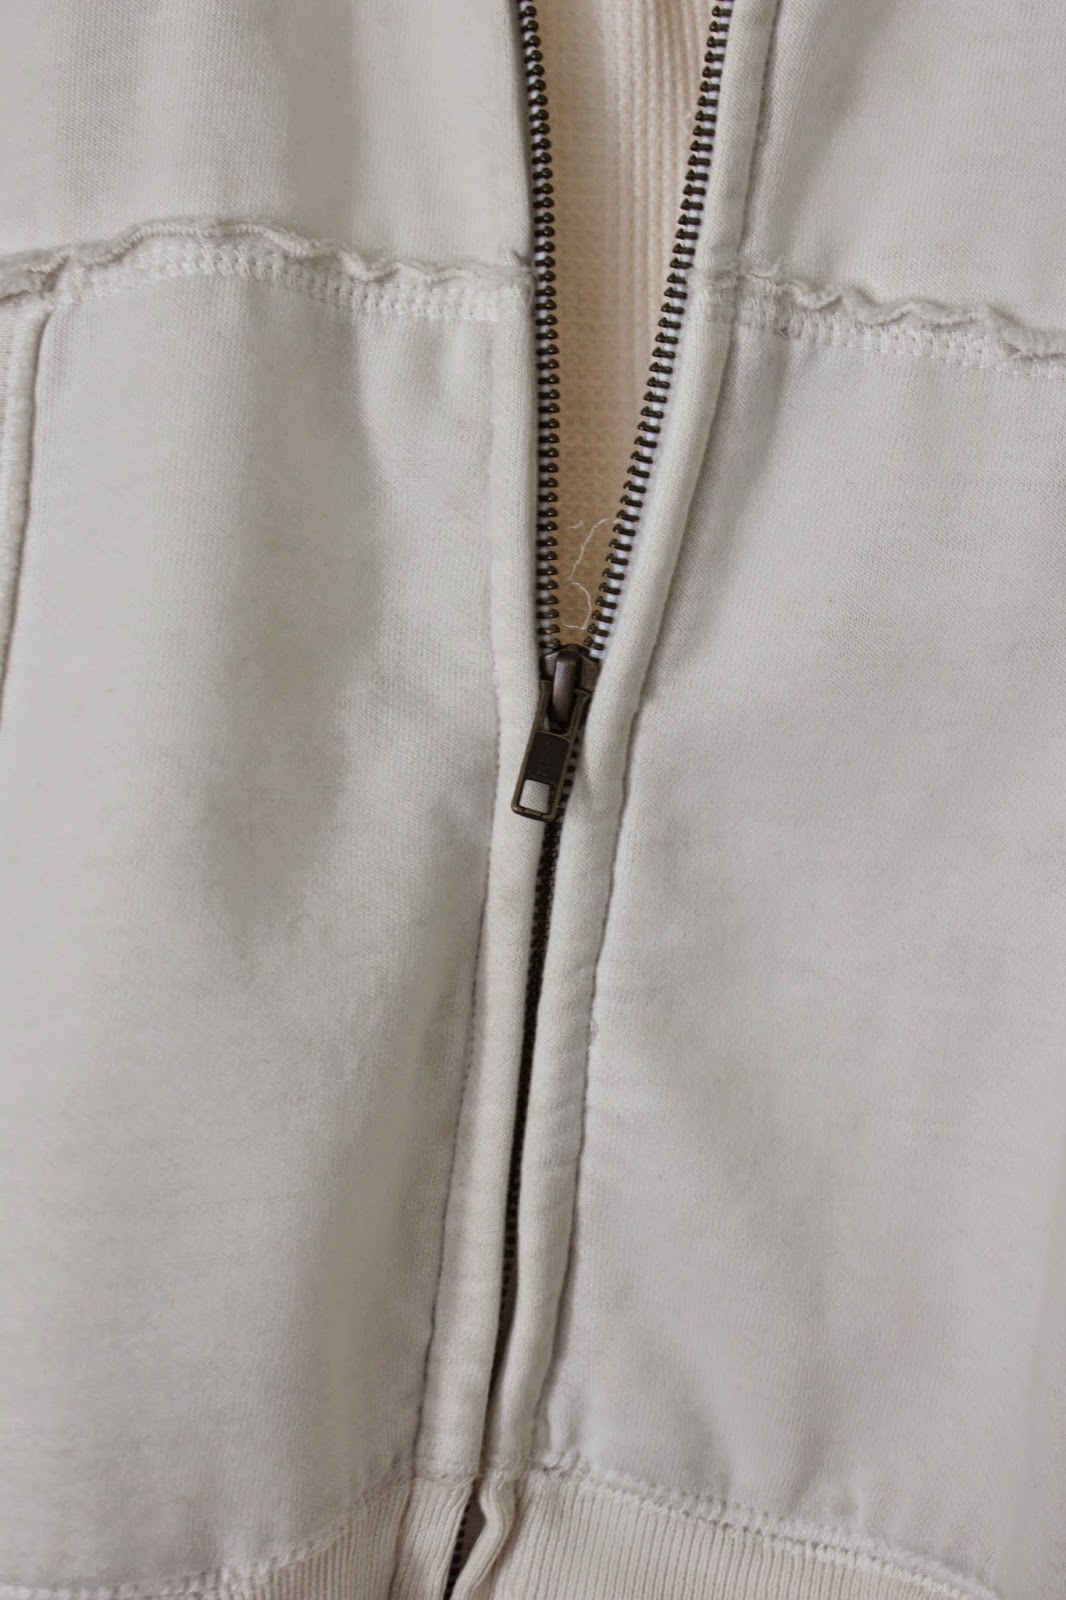 sewcreatelive: How to Replace a Jacket Zipper